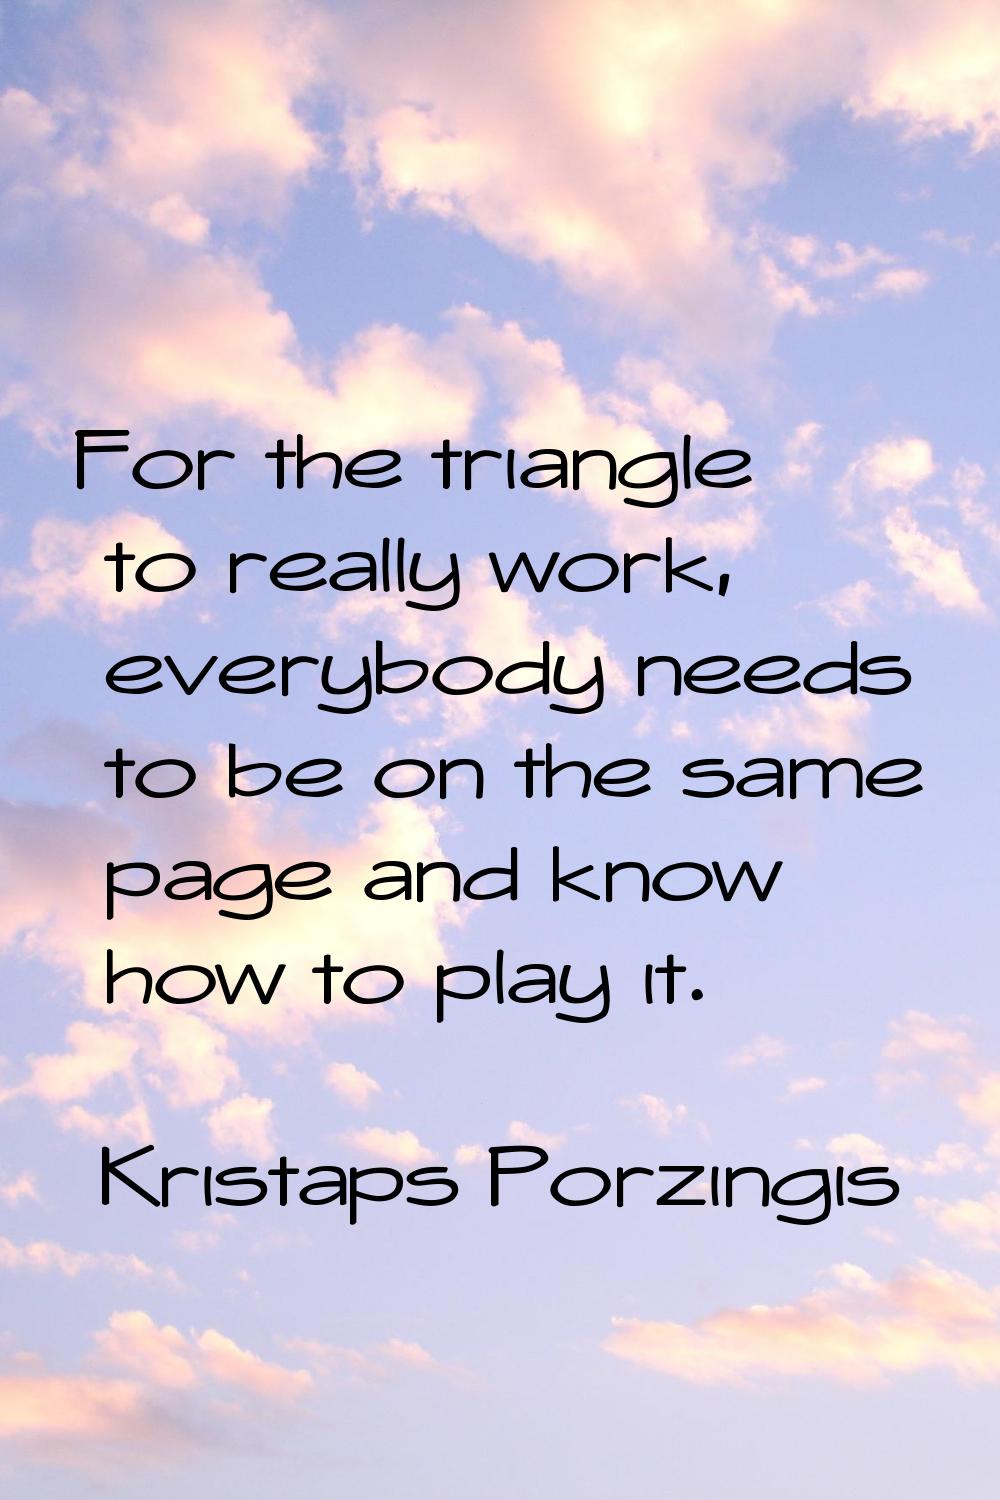 For the triangle to really work, everybody needs to be on the same page and know how to play it.